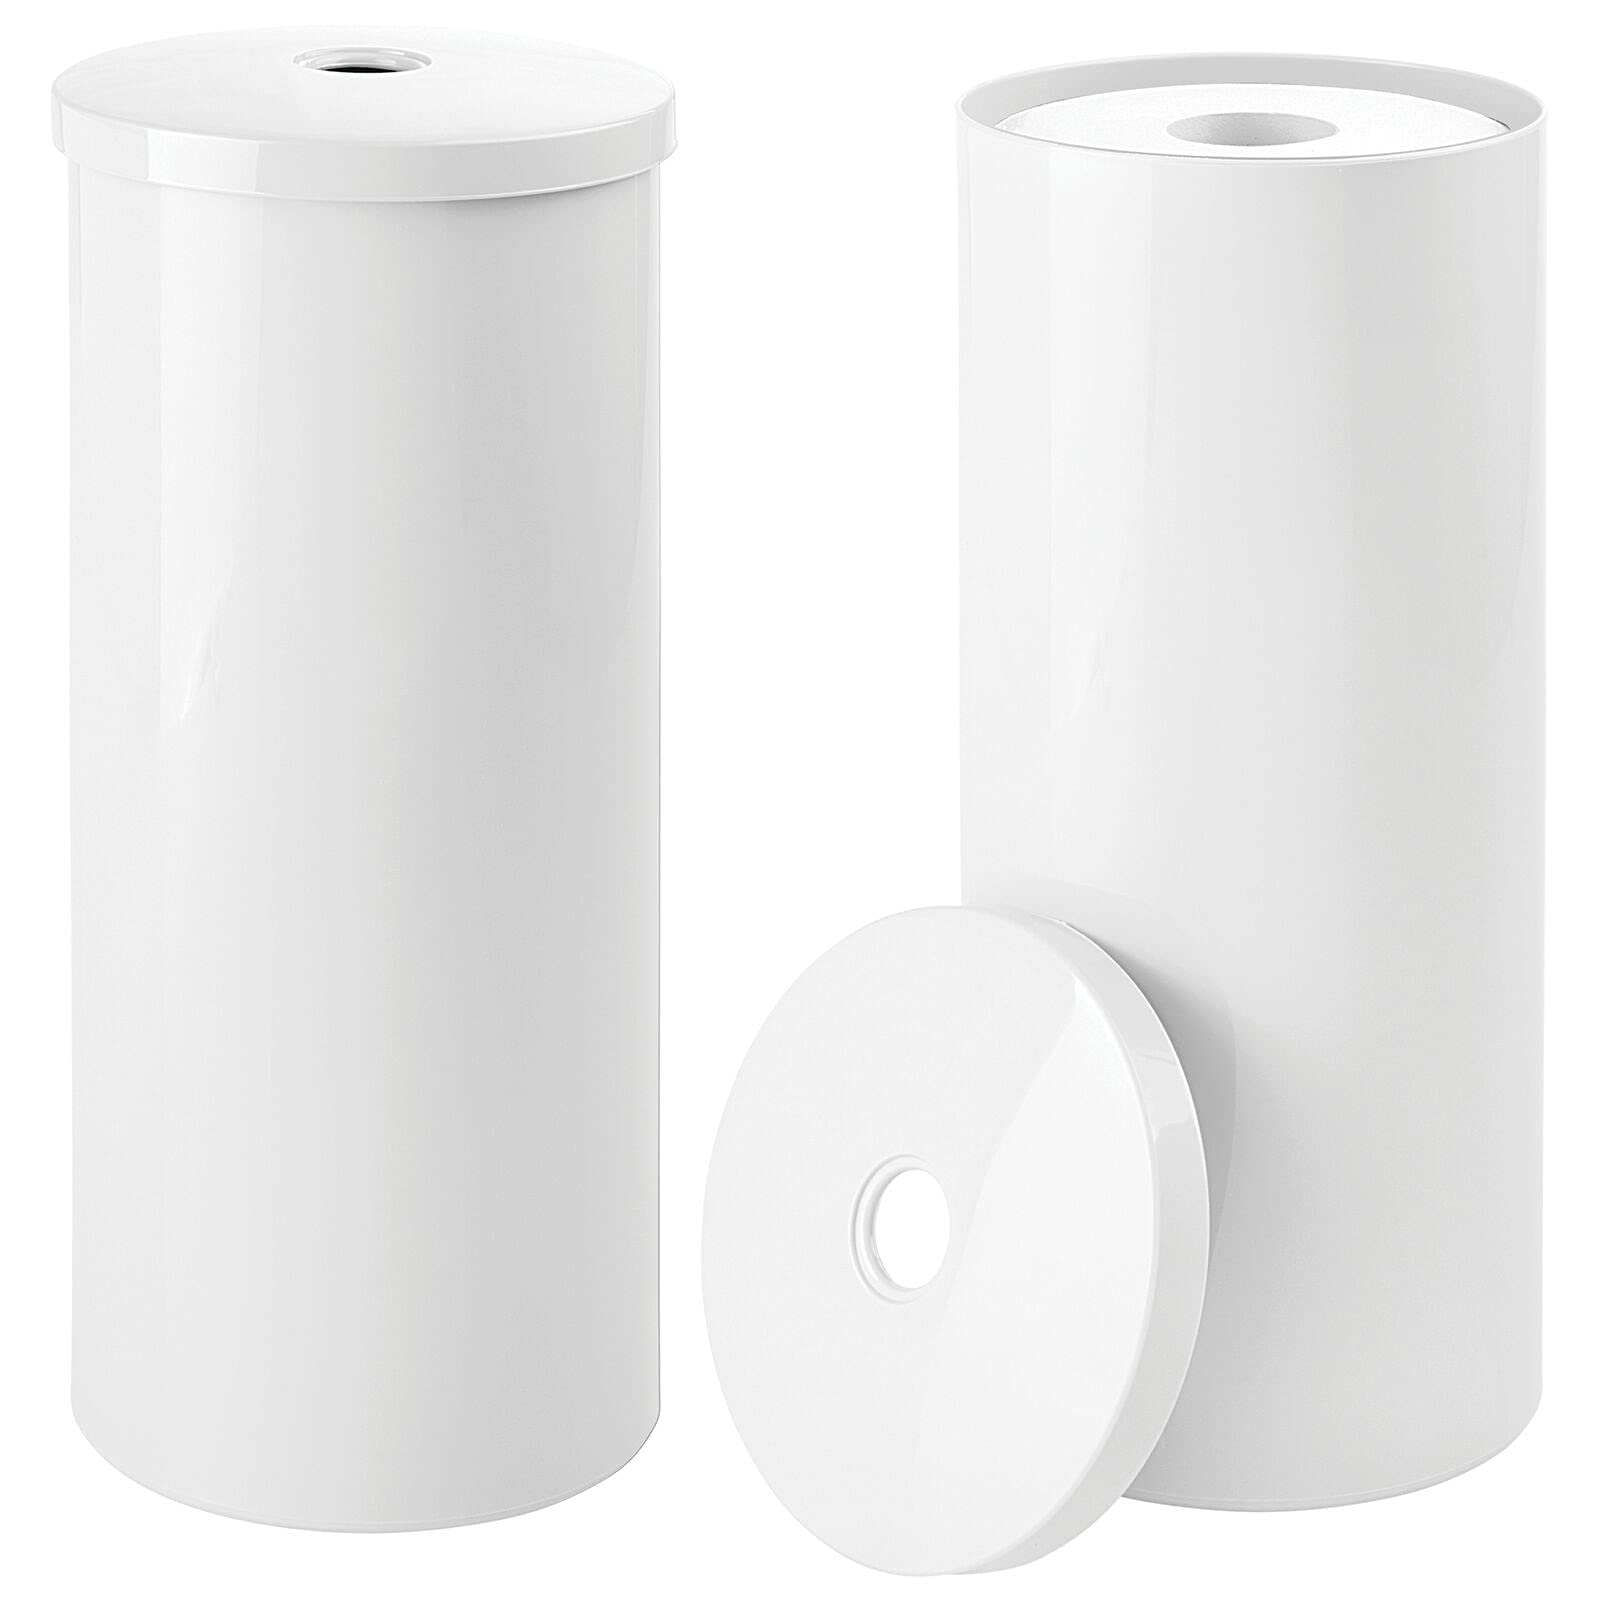 mDesign Plastic Toilet Paper 3-Roll Storage Organizer with Cover, 2 Pack -  White 